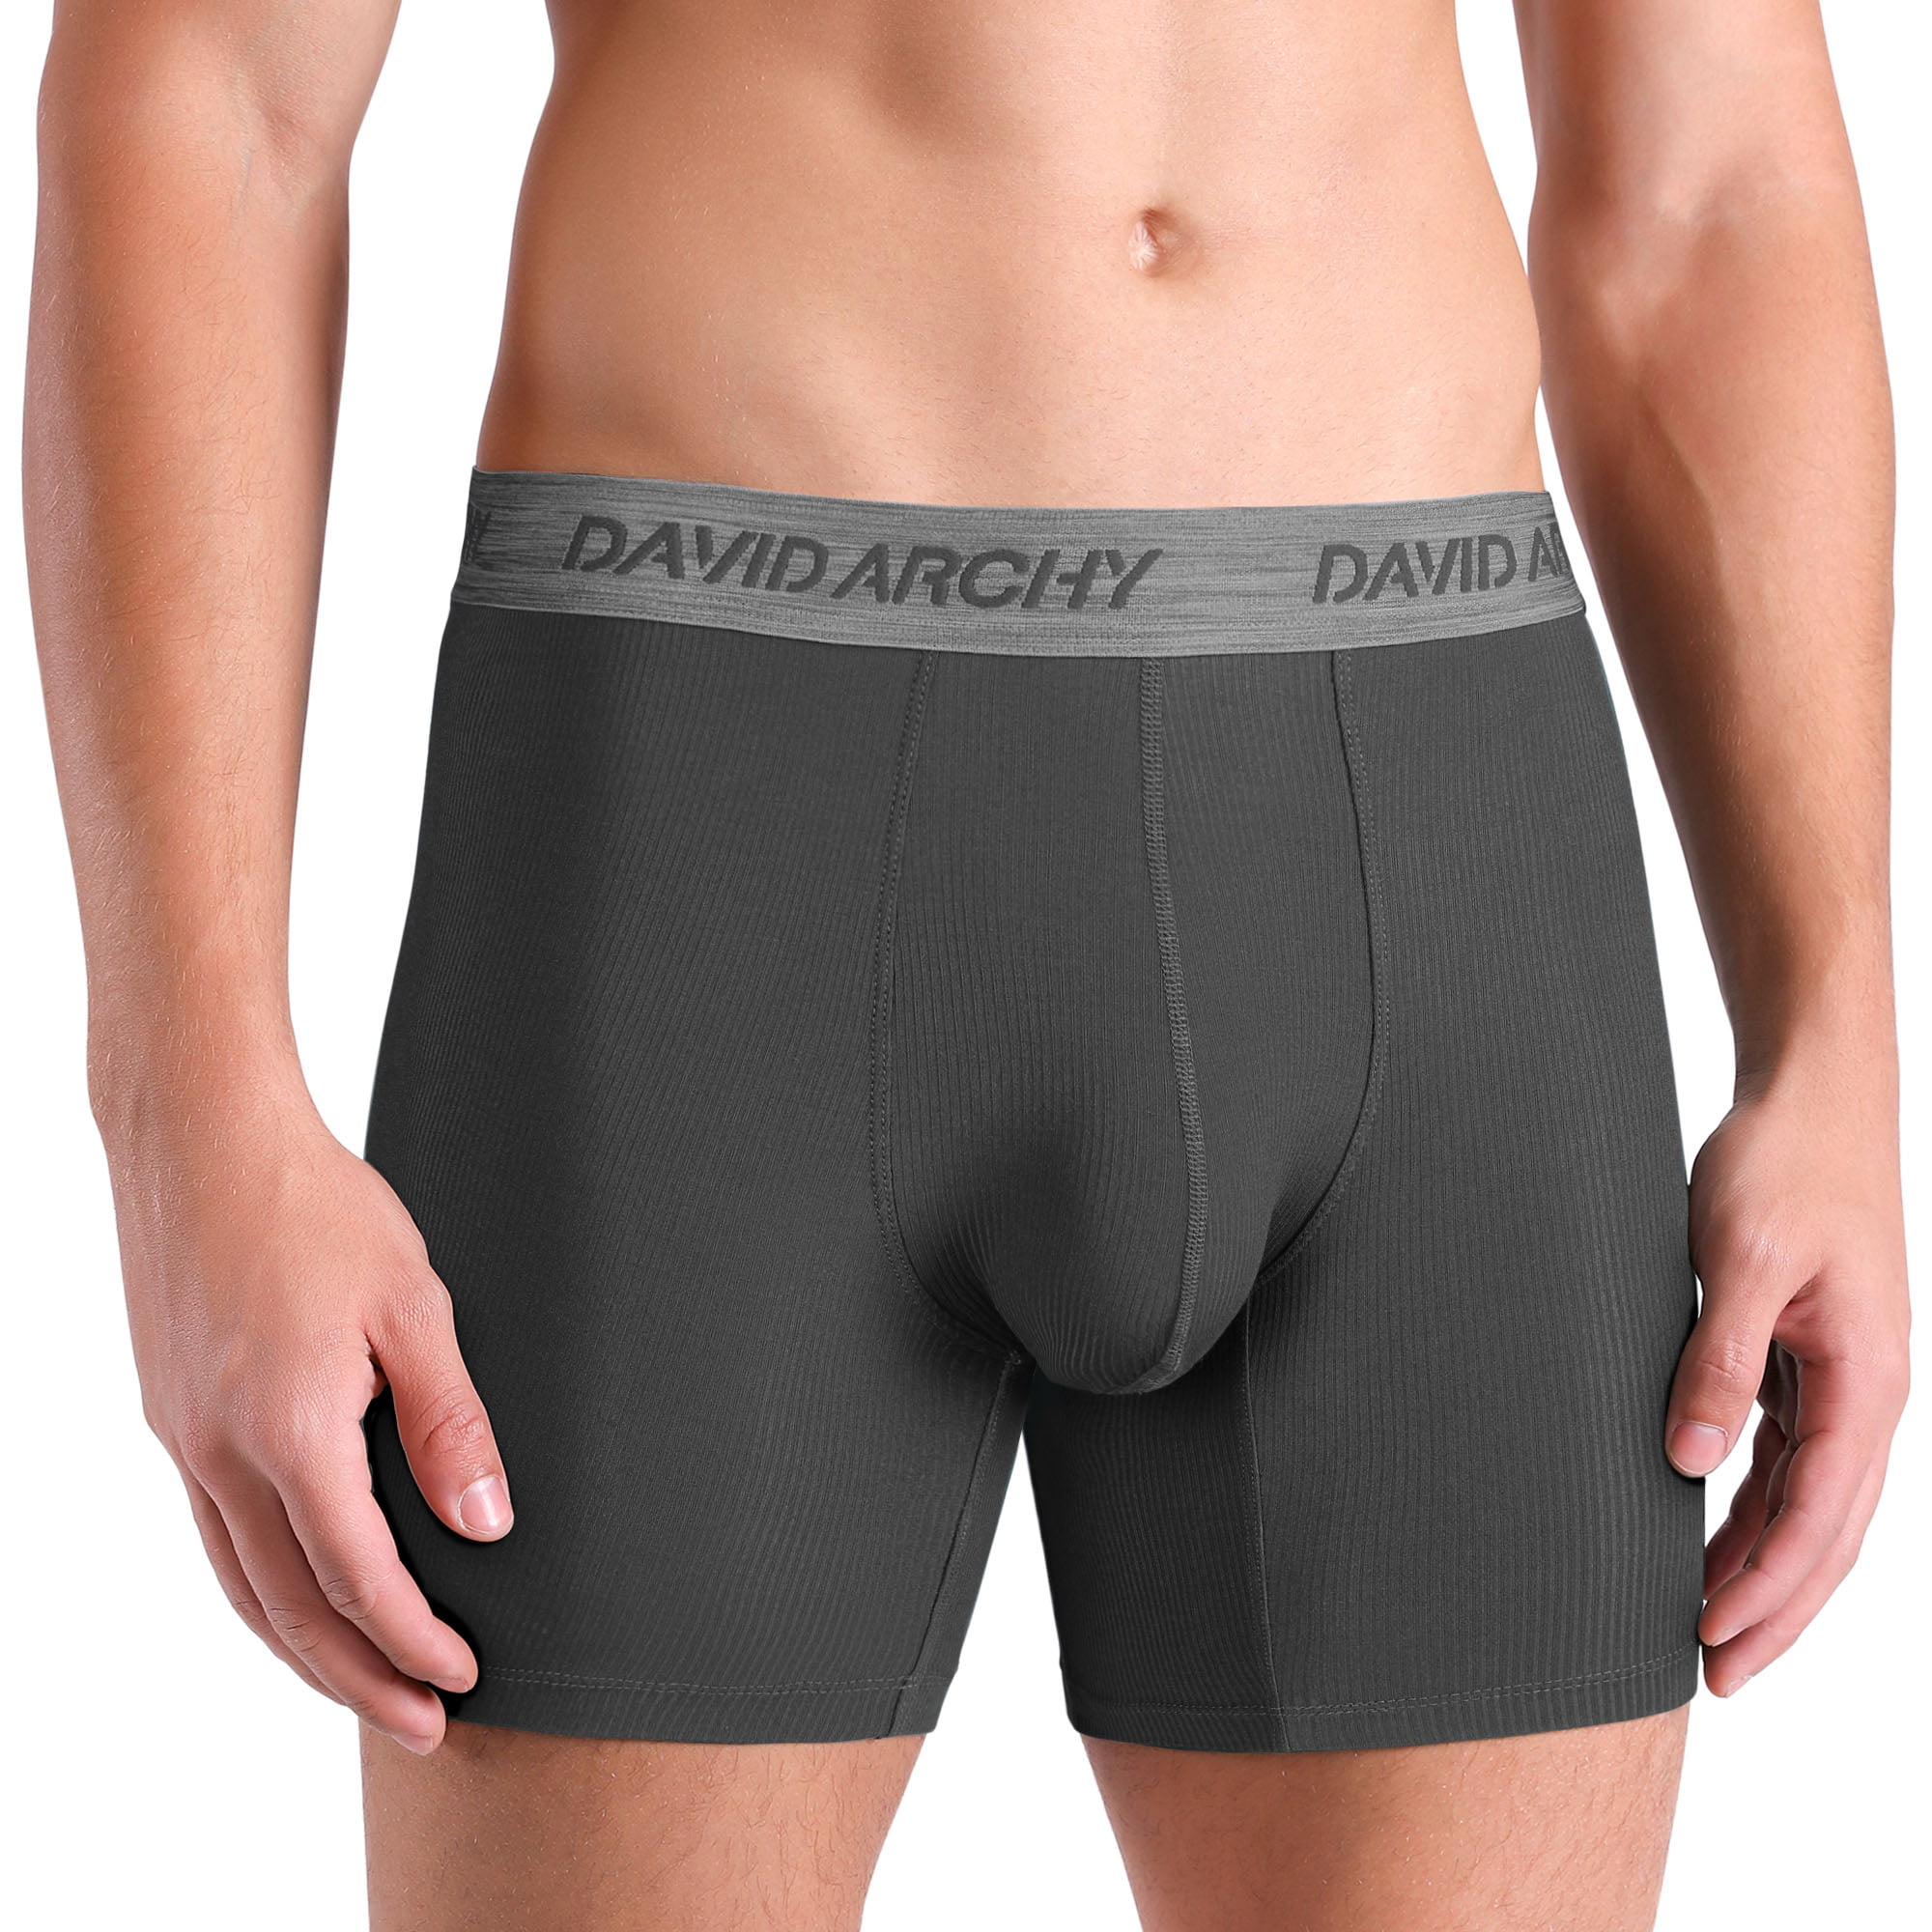 DAVID ARCHY Mens Underwear Ultra Soft Micro Modal Trunks Boxer Briefs with Fly Boxer Shorts in 3 or 4 Pack 